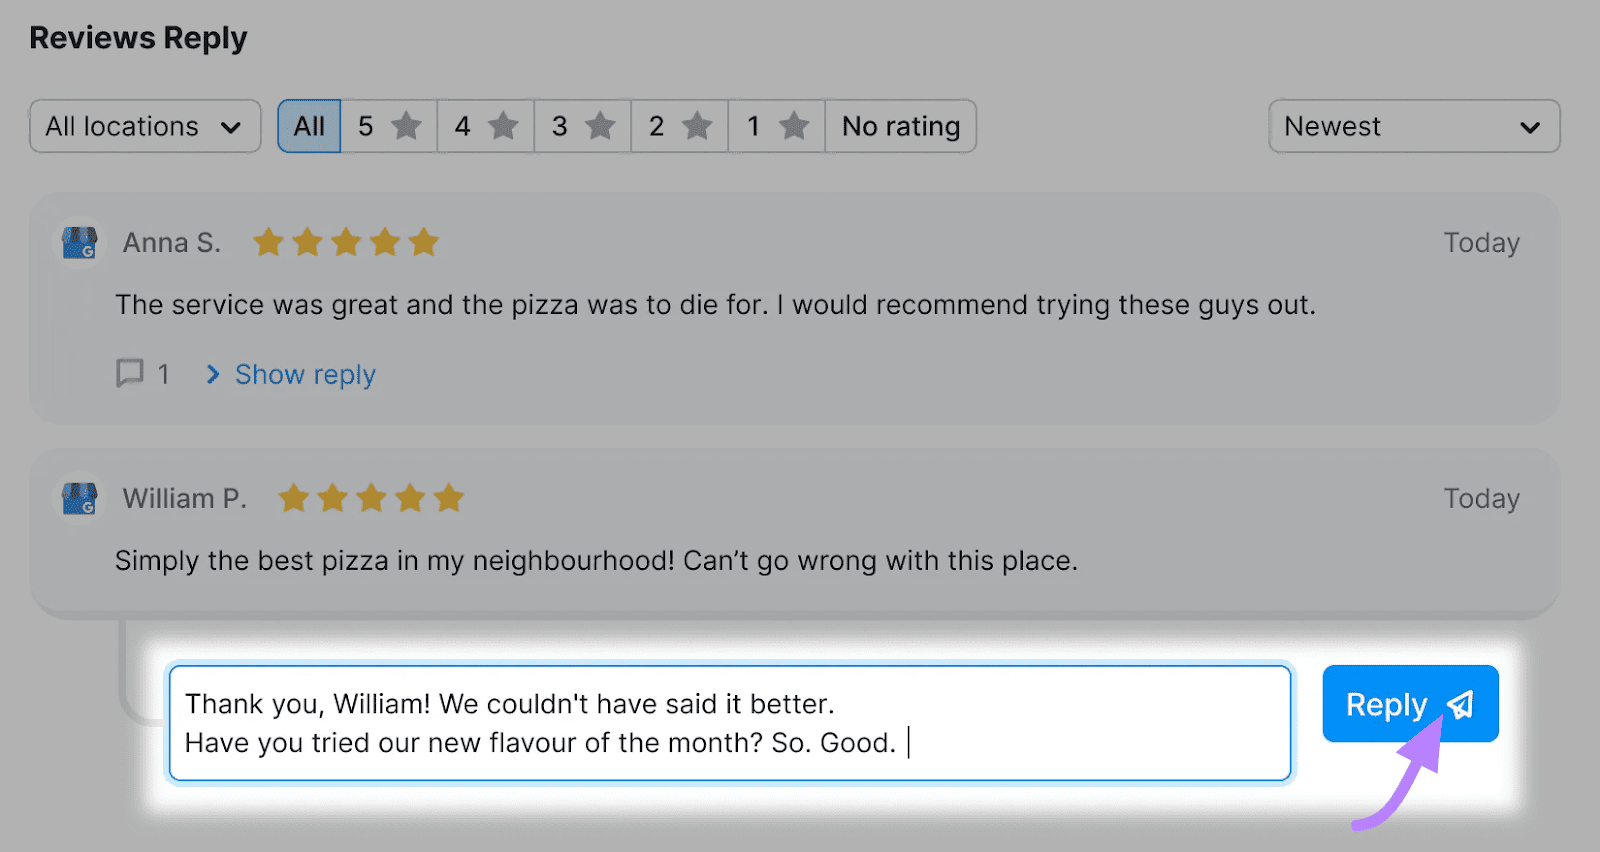 Replying to a review from the Review Management tool